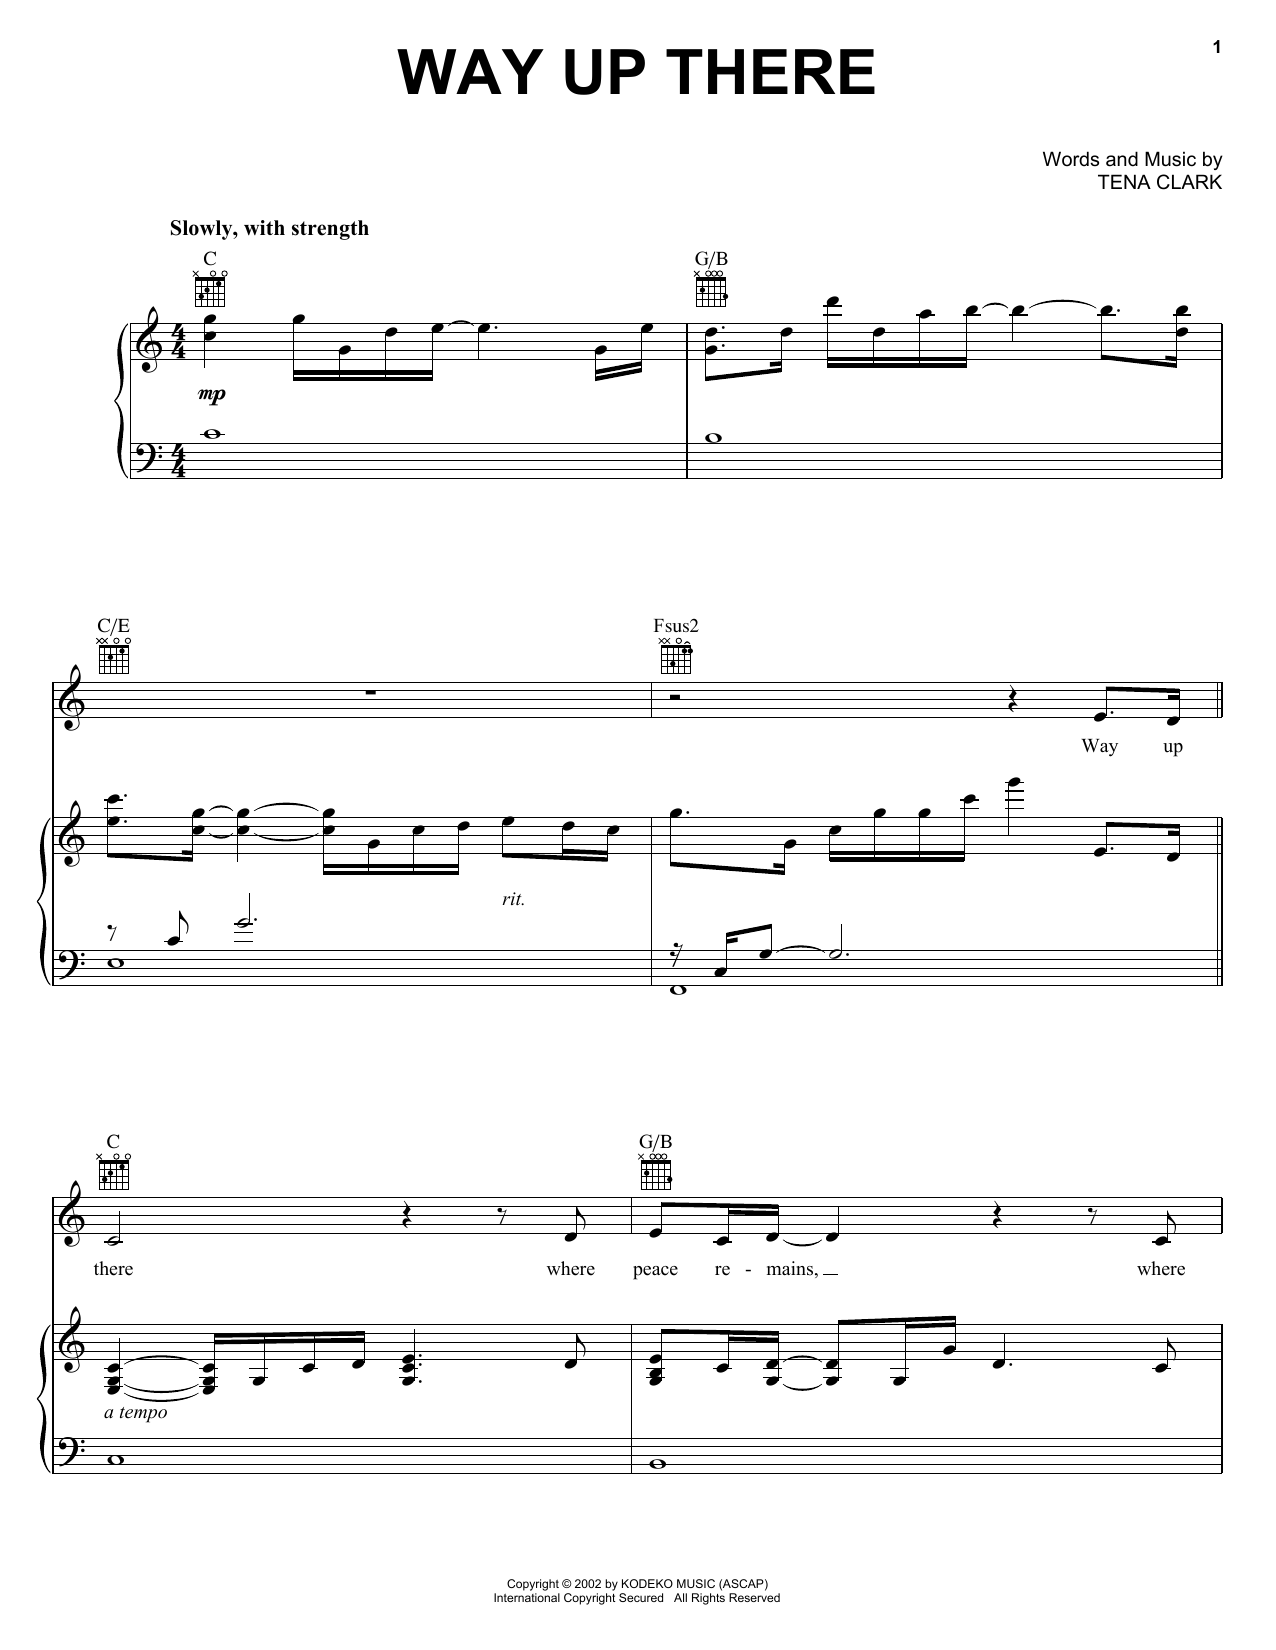 Download Patti LaBelle Way Up There Sheet Music